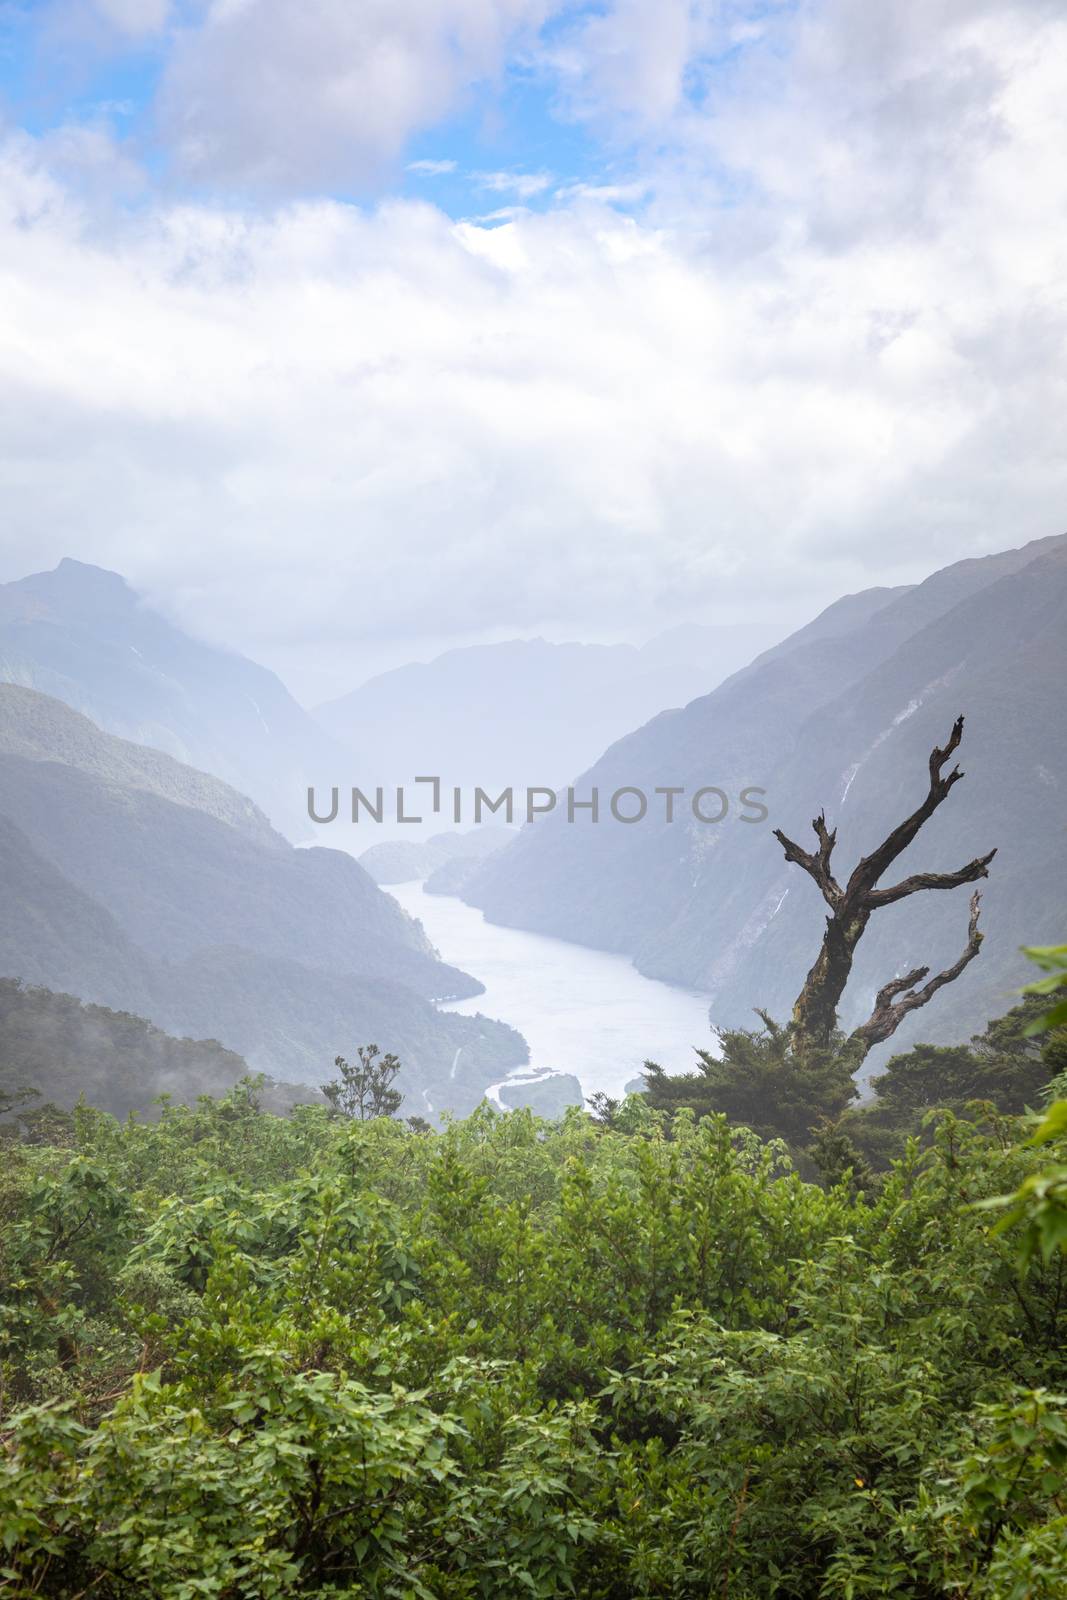 An image of the Fiordland National Park New Zealand